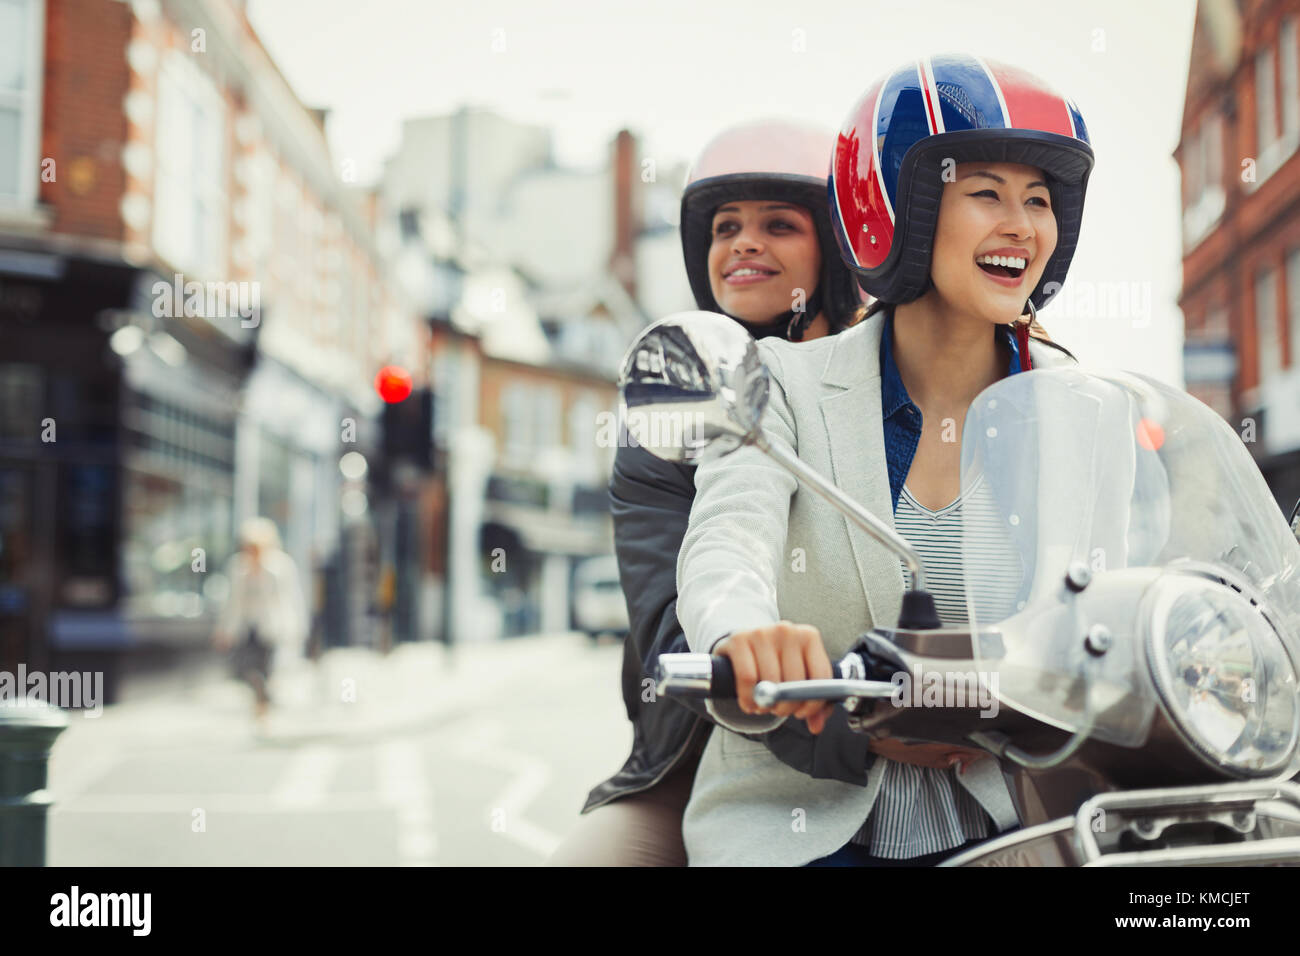 Smiling young women friends wearing helmets and riding motor scooter on urban street Stock Photo